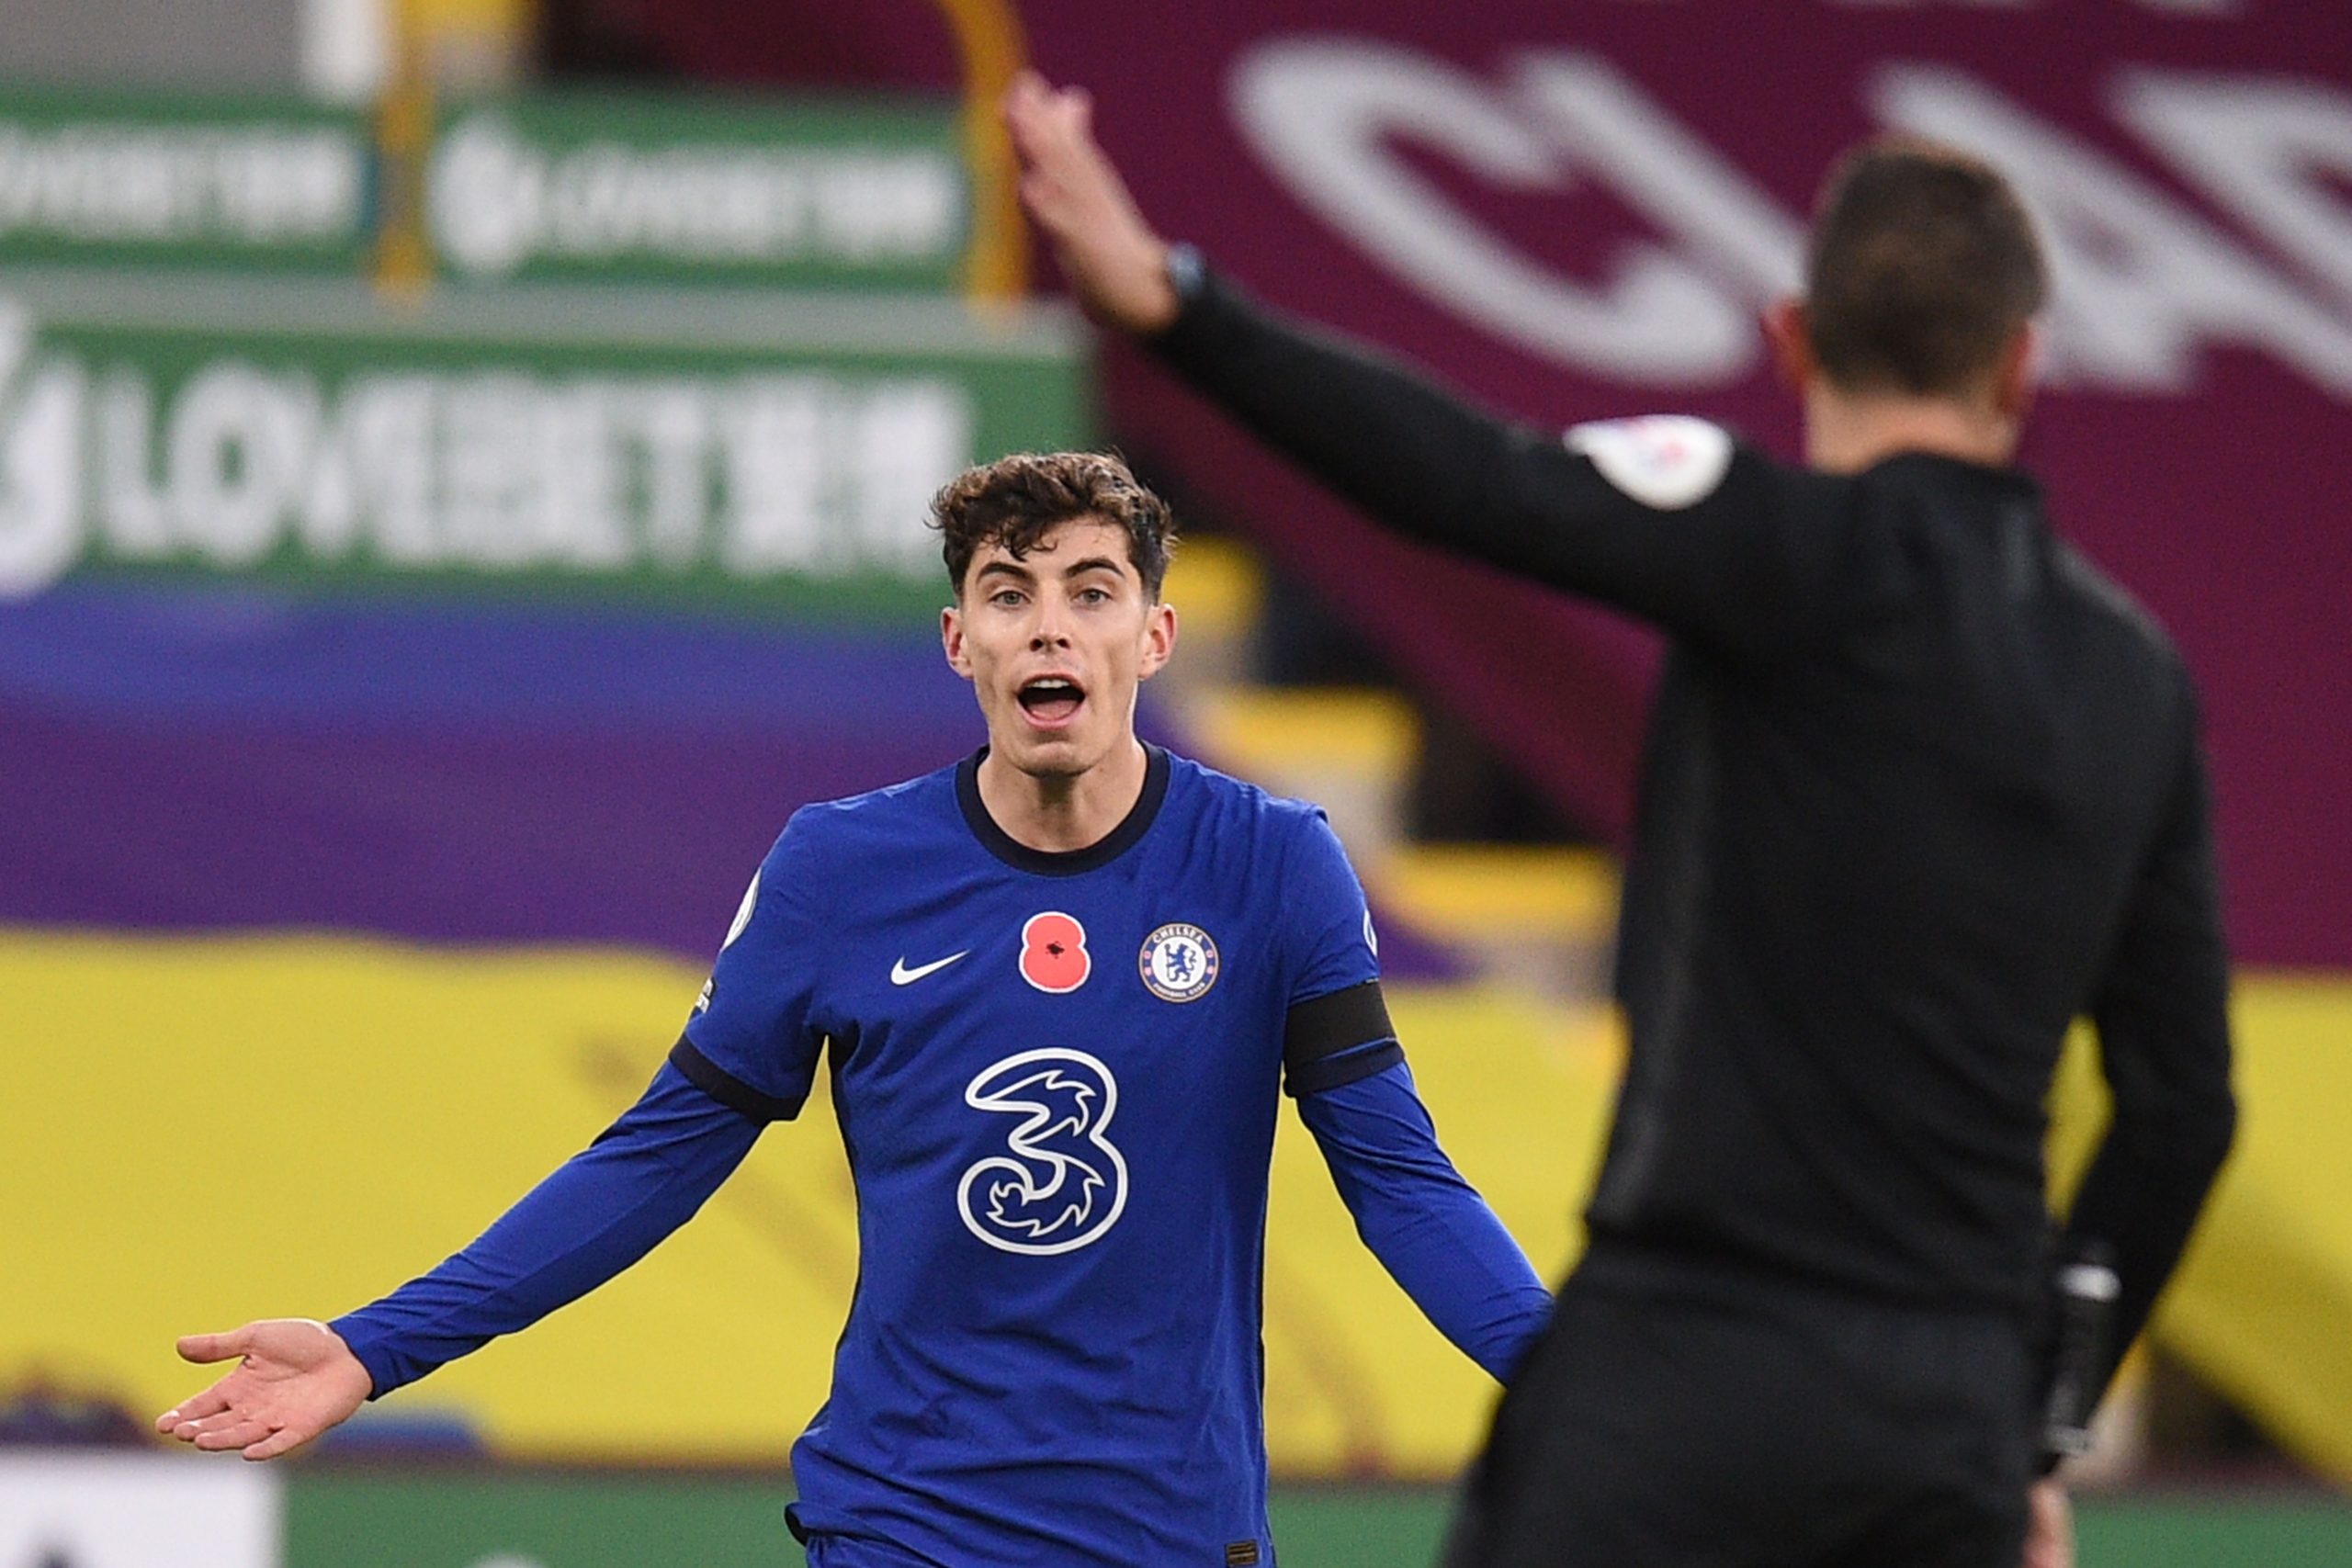 Kai Havertz in action for Chelsea. (GETTY Images)